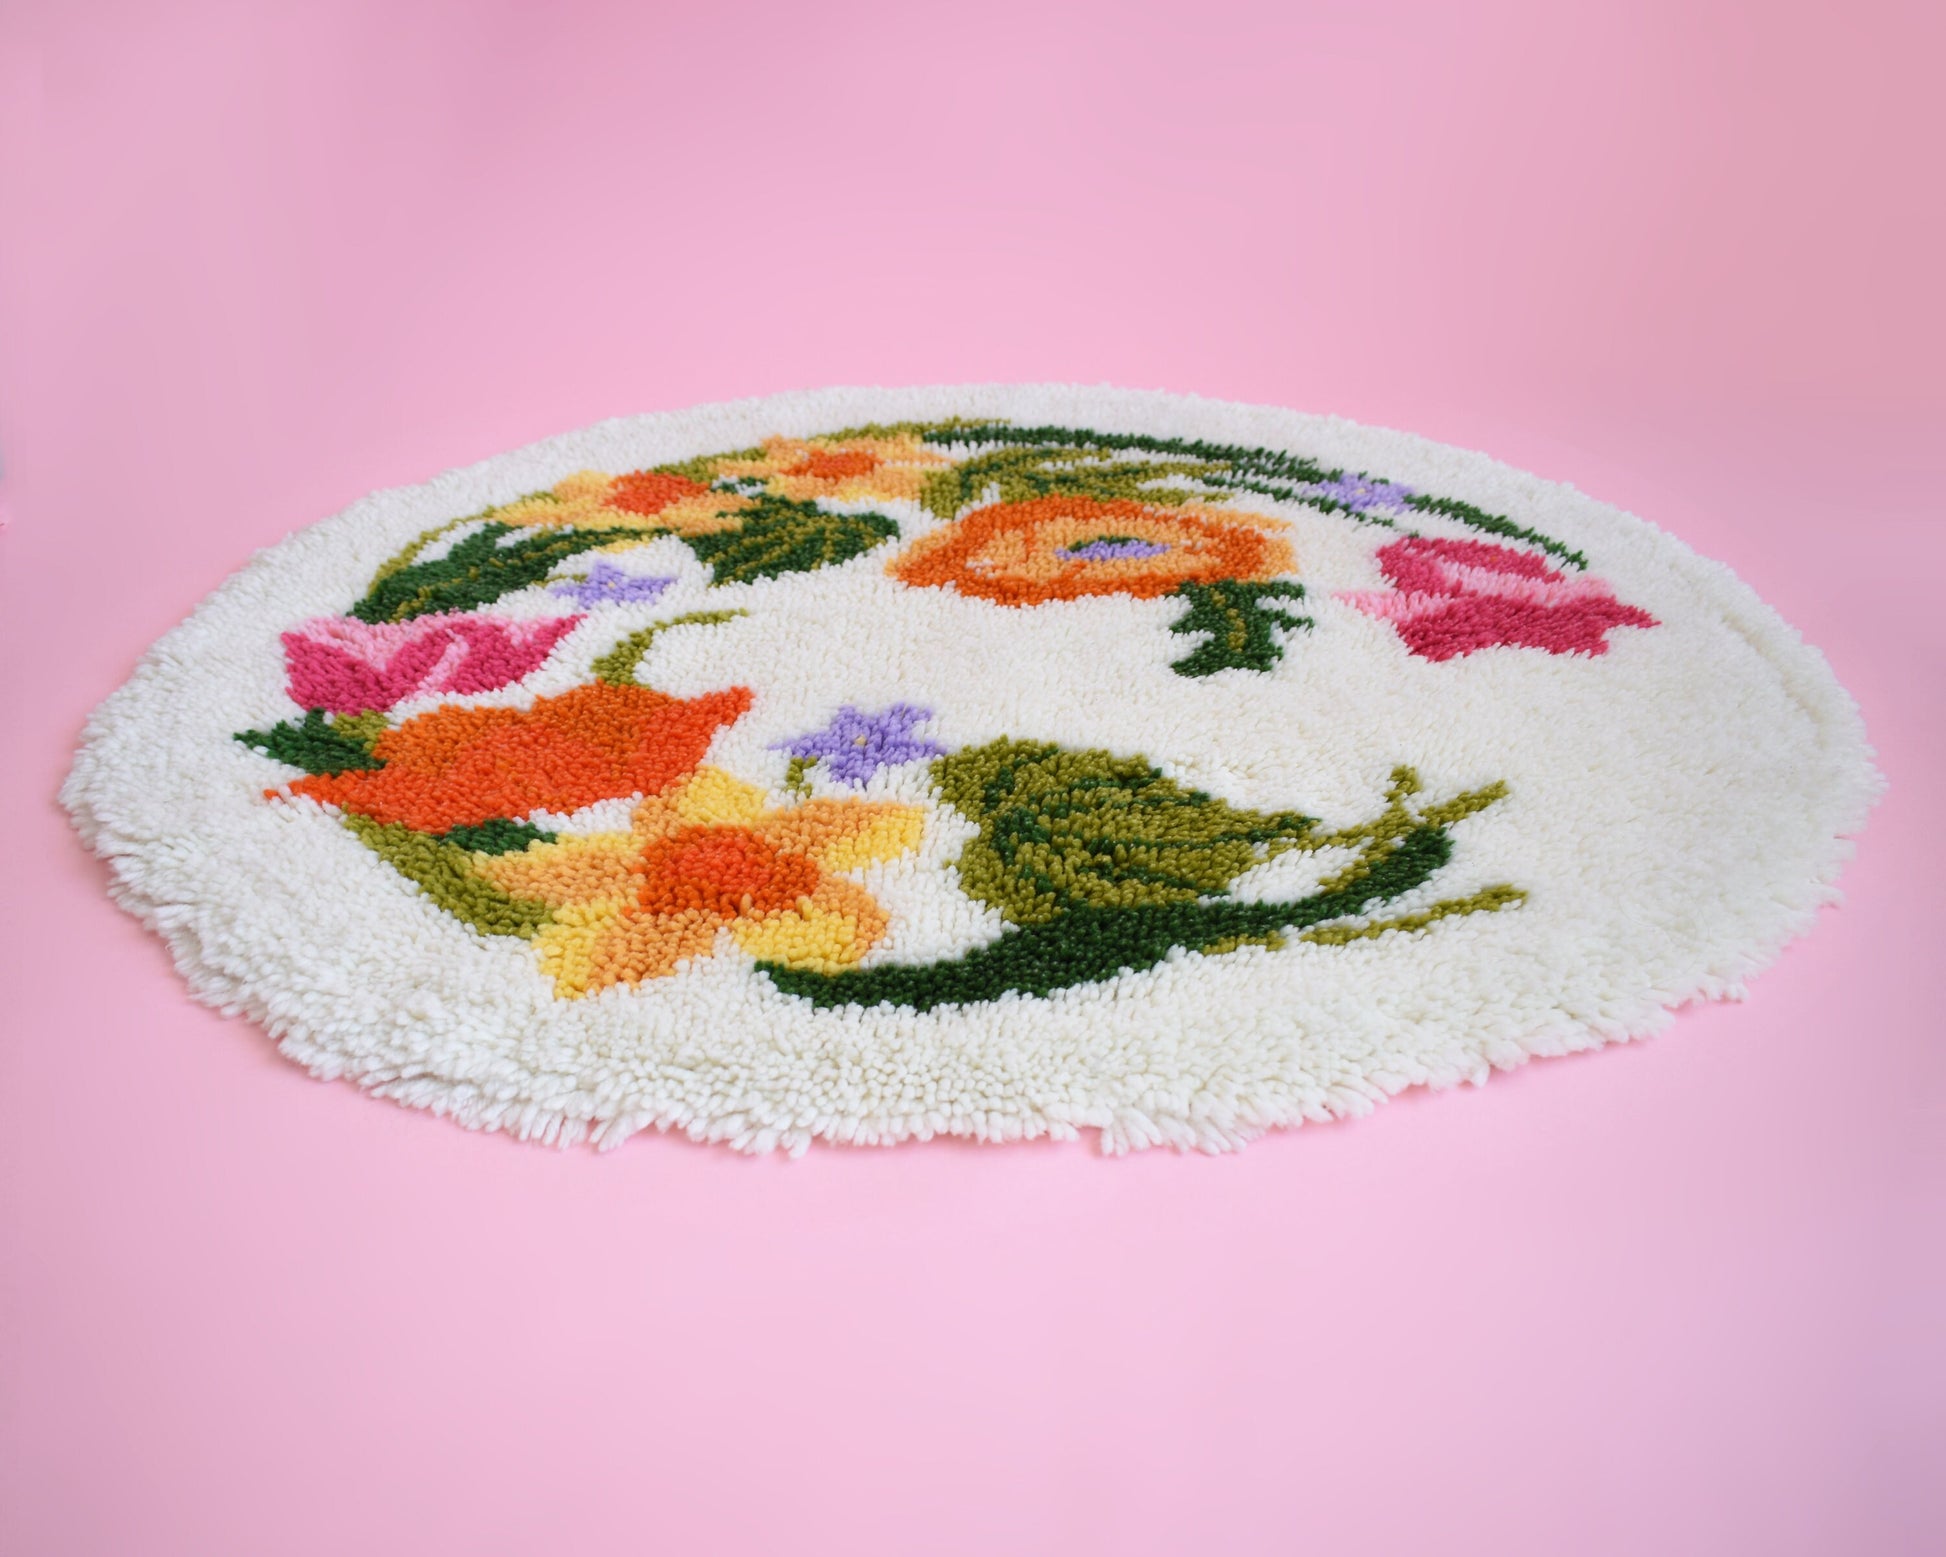 A view from the side of a vintage round floral latch hook rug that has cream white shaggy acrylic with a colorful floral motif in pinks, orange, yellow, purple and greens. The rug and the rug is on a pink background.